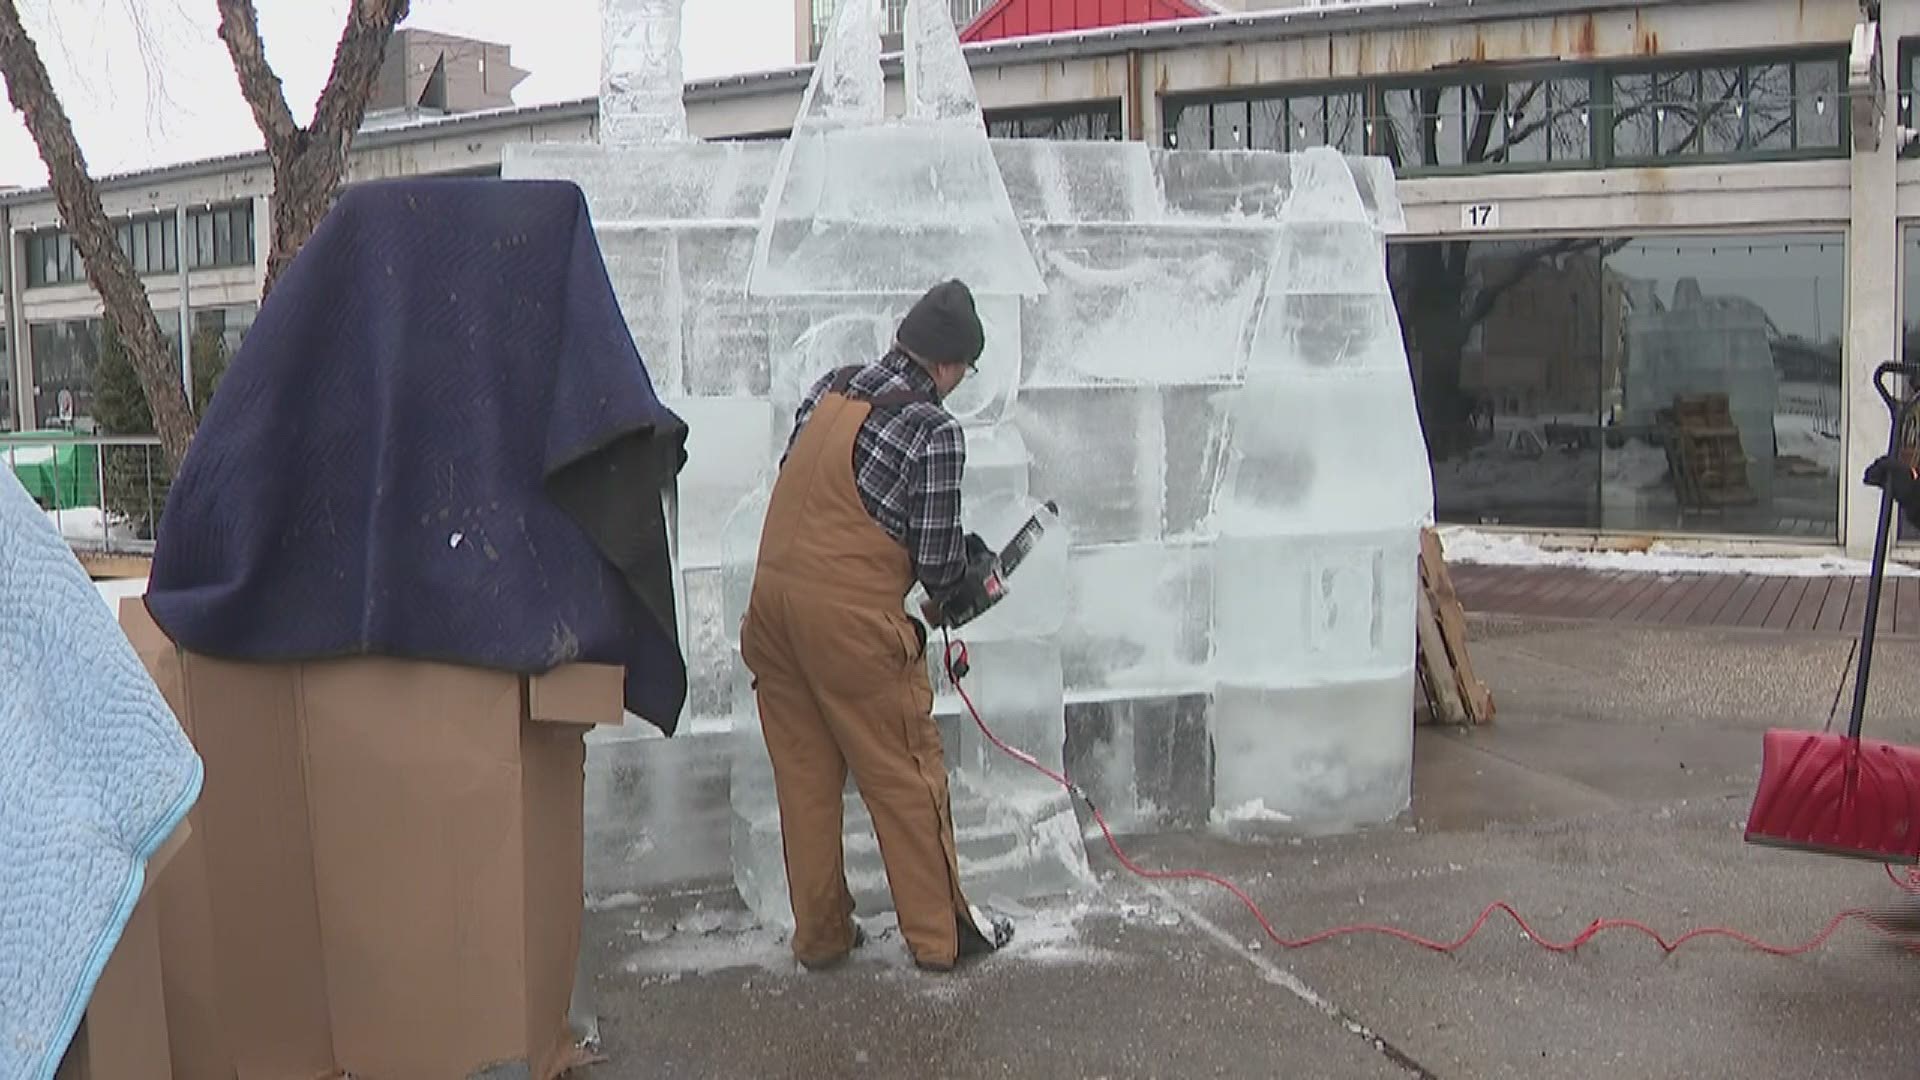 Artists this year are working with about 100 blocks of ice to create a Halloween scene.